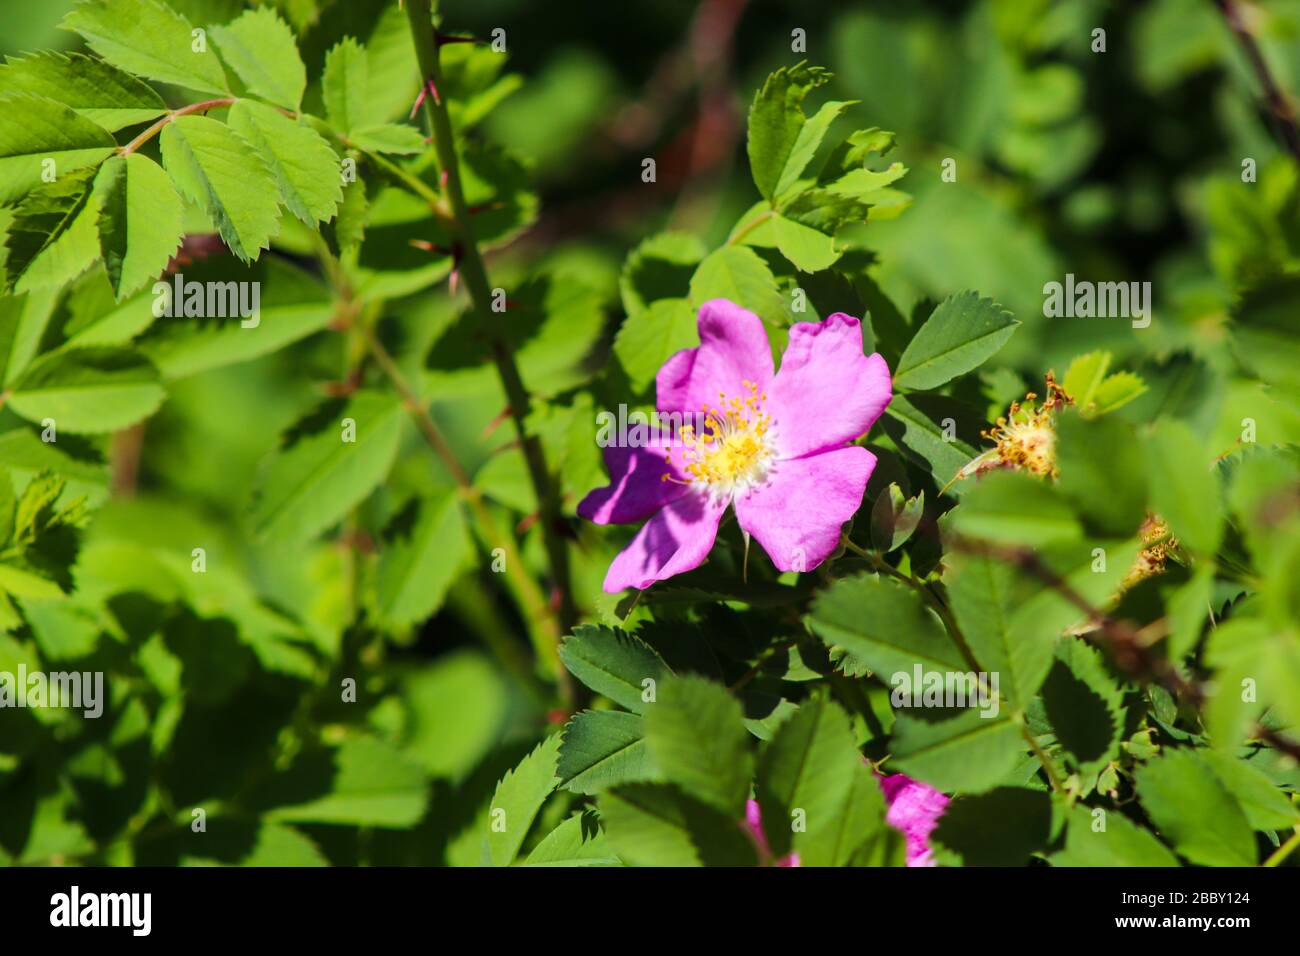 A pink flower surrounded by group of leaves Stock Photo